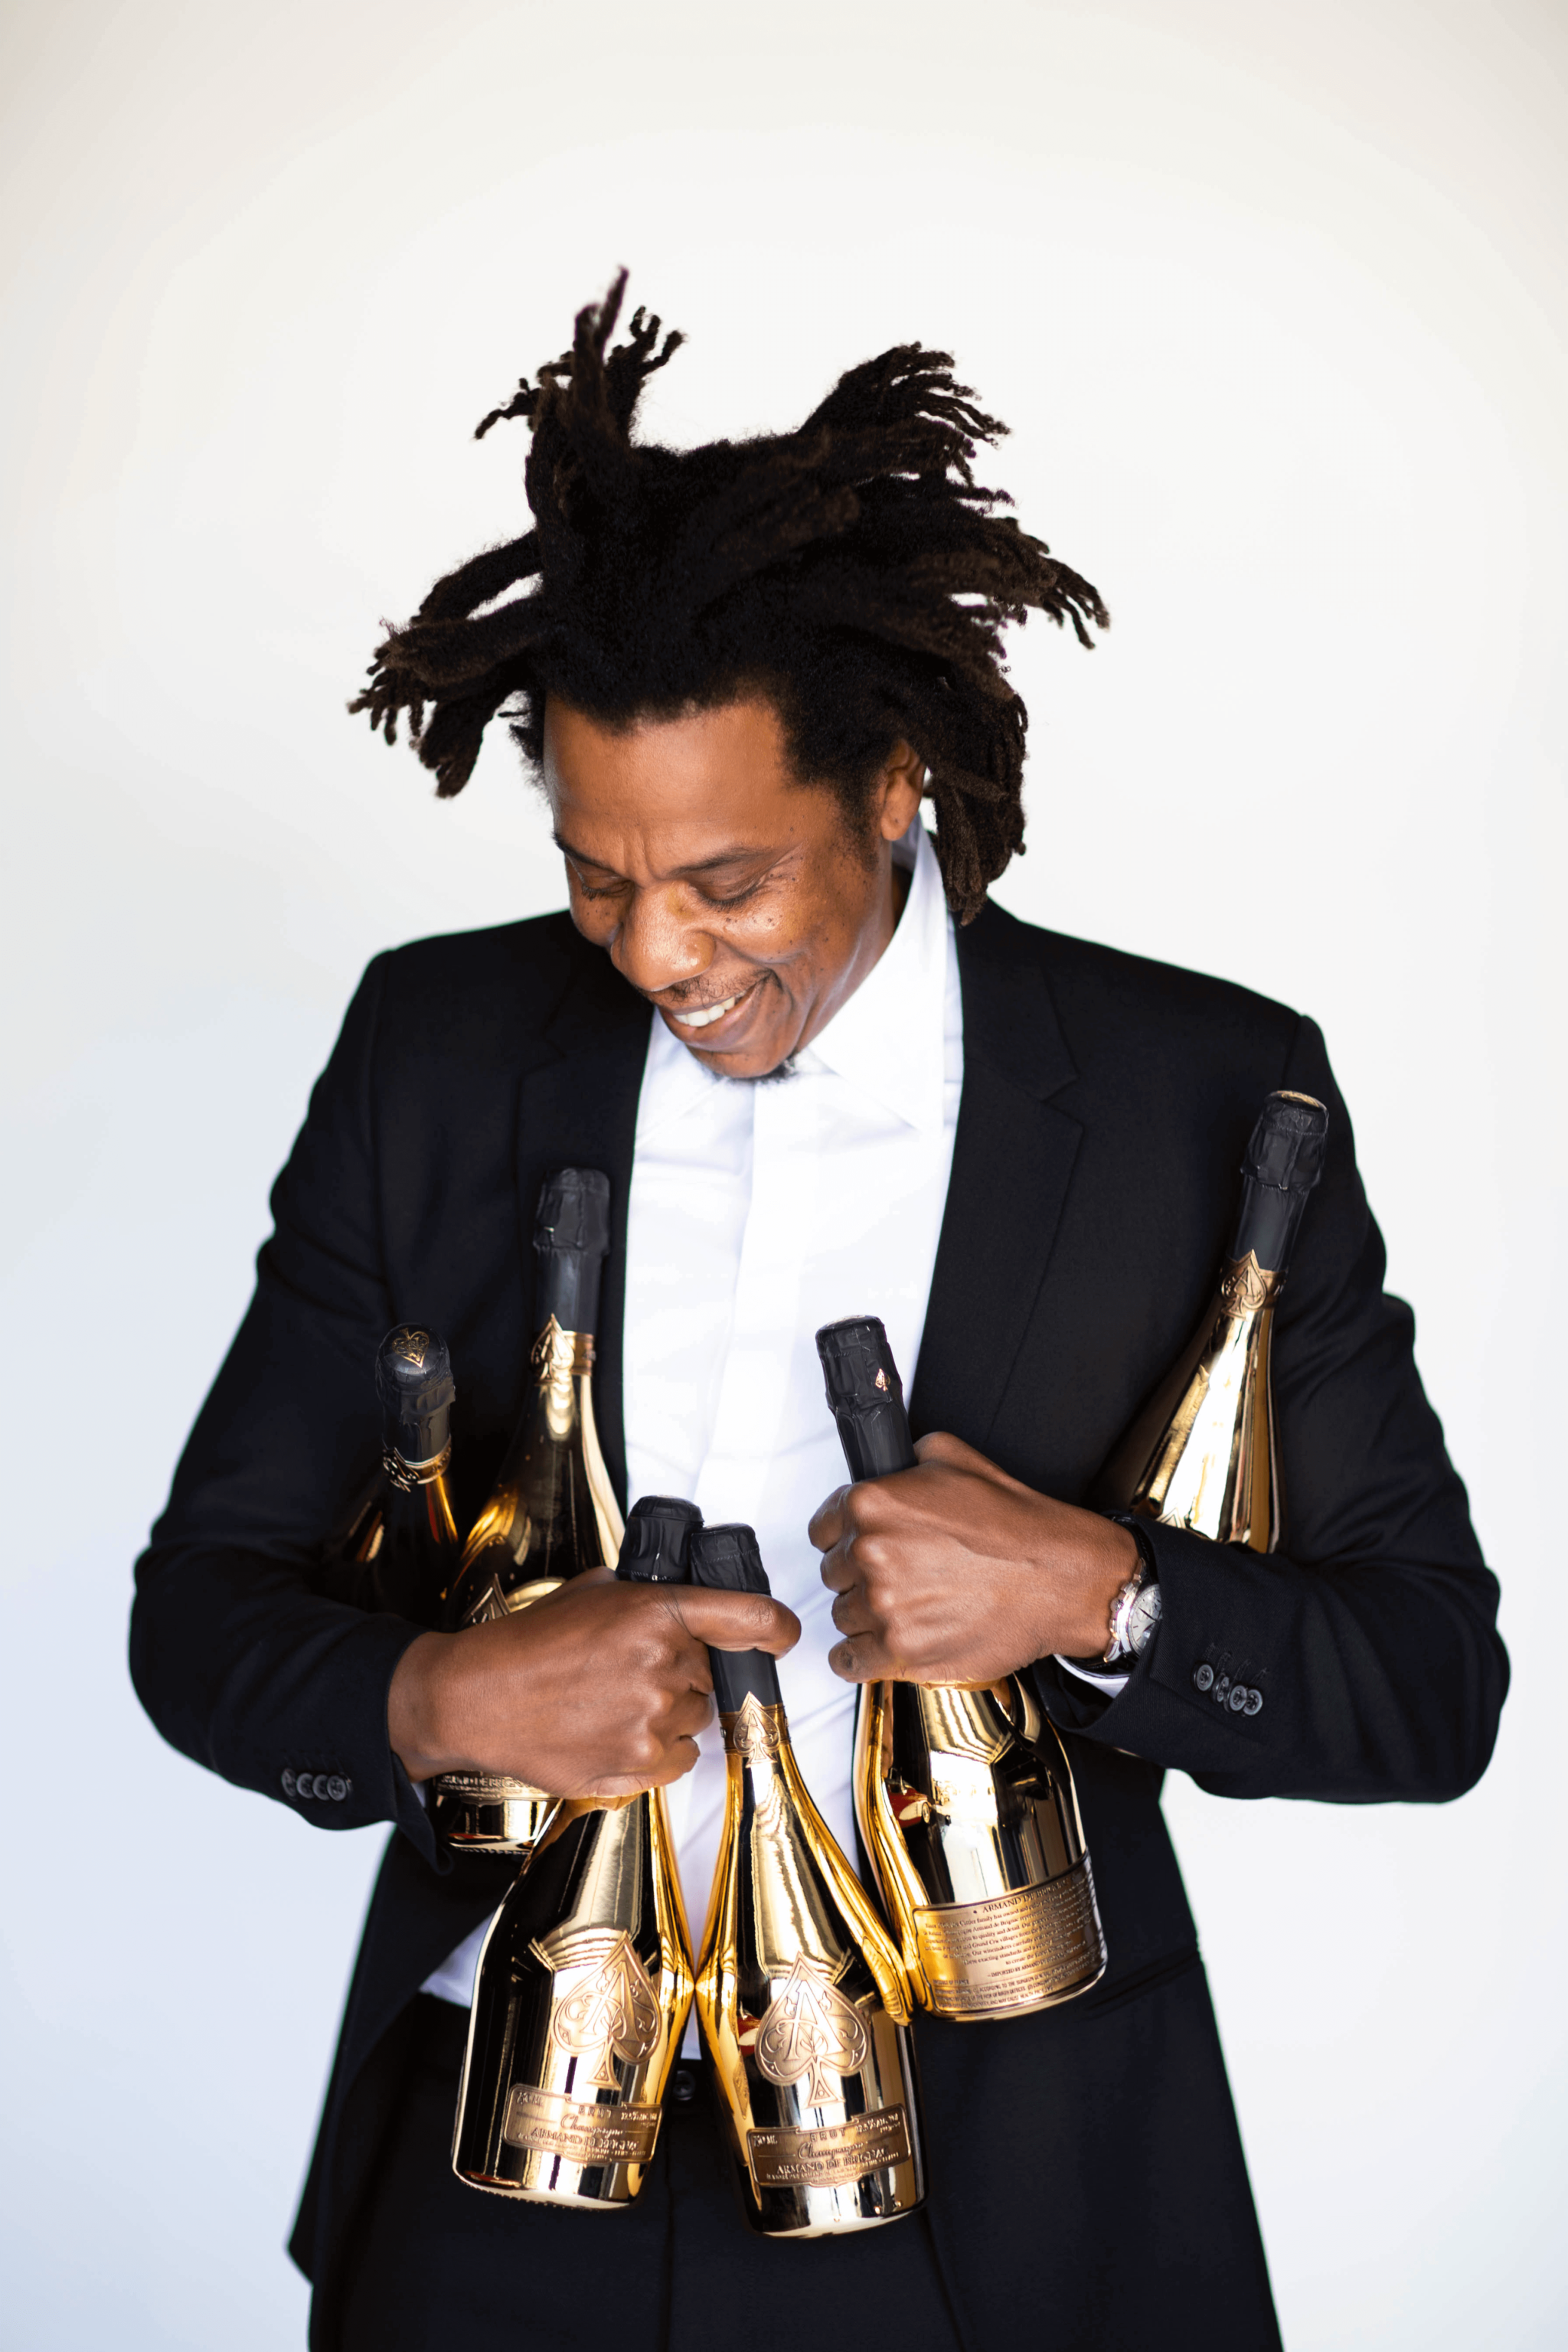 Moët Hennessy Partners with Shawn 'Jay-Z' Carter Through 50